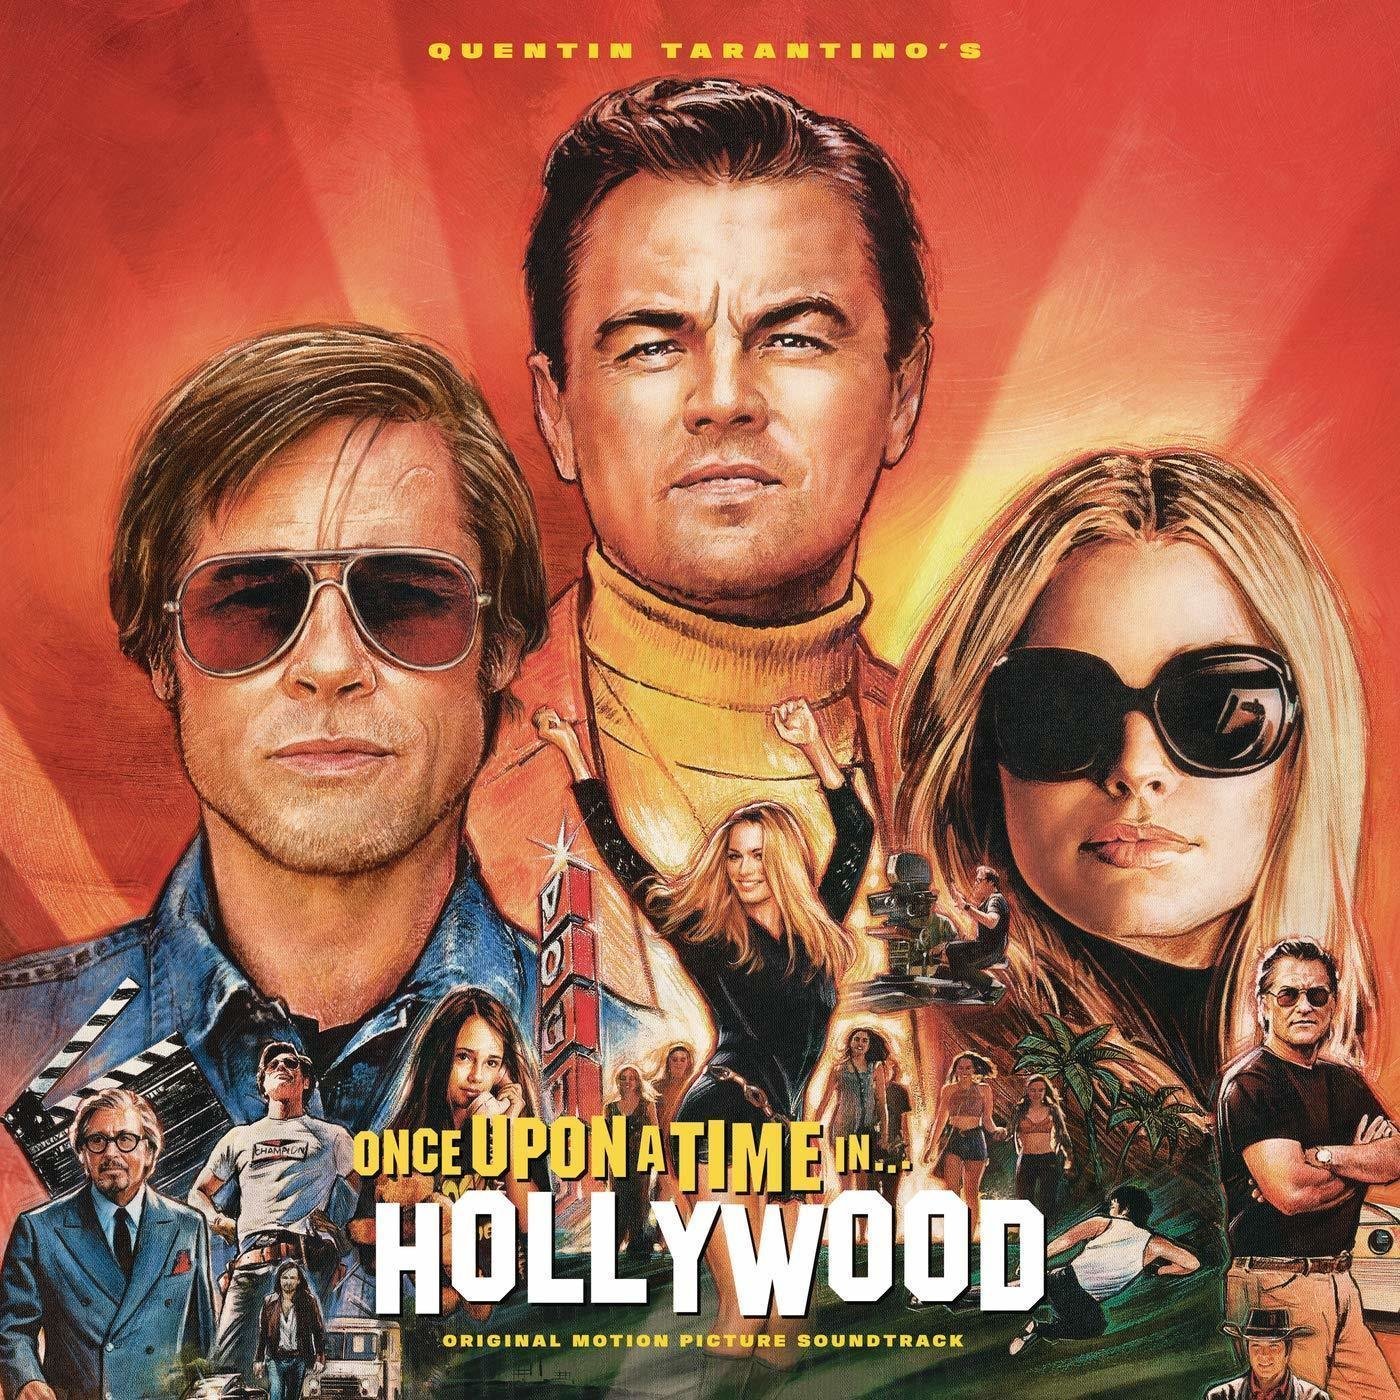 Vinylplade Quentin Tarantino - Once Upon a Time In Hollywood OST (Orange Coloured) (2 LP)